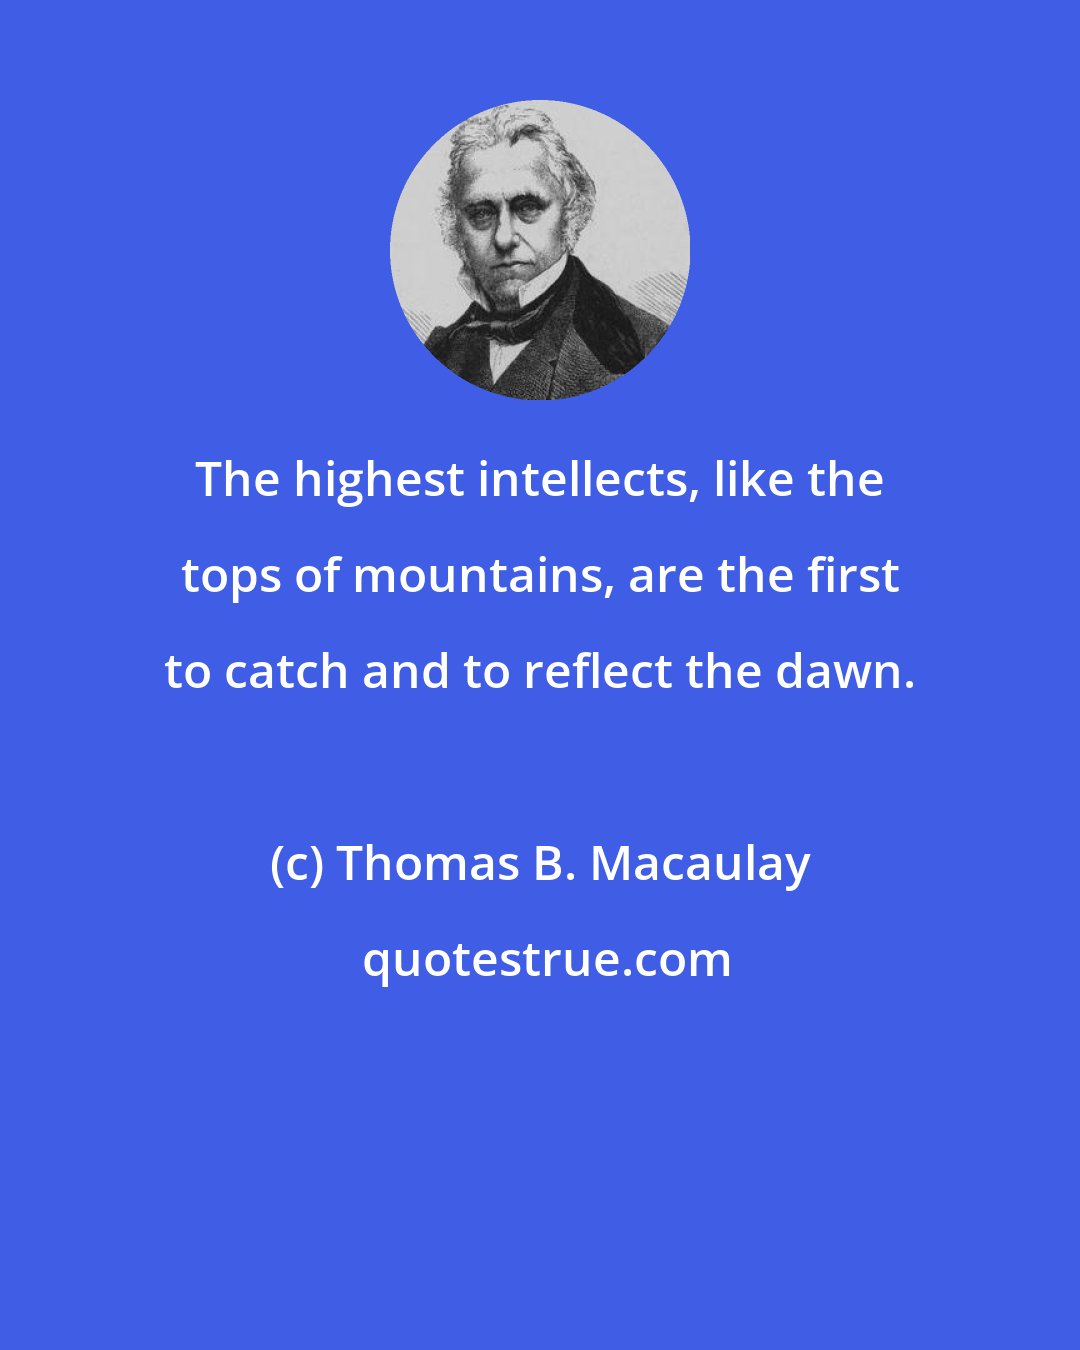 Thomas B. Macaulay: The highest intellects, like the tops of mountains, are the first to catch and to reflect the dawn.